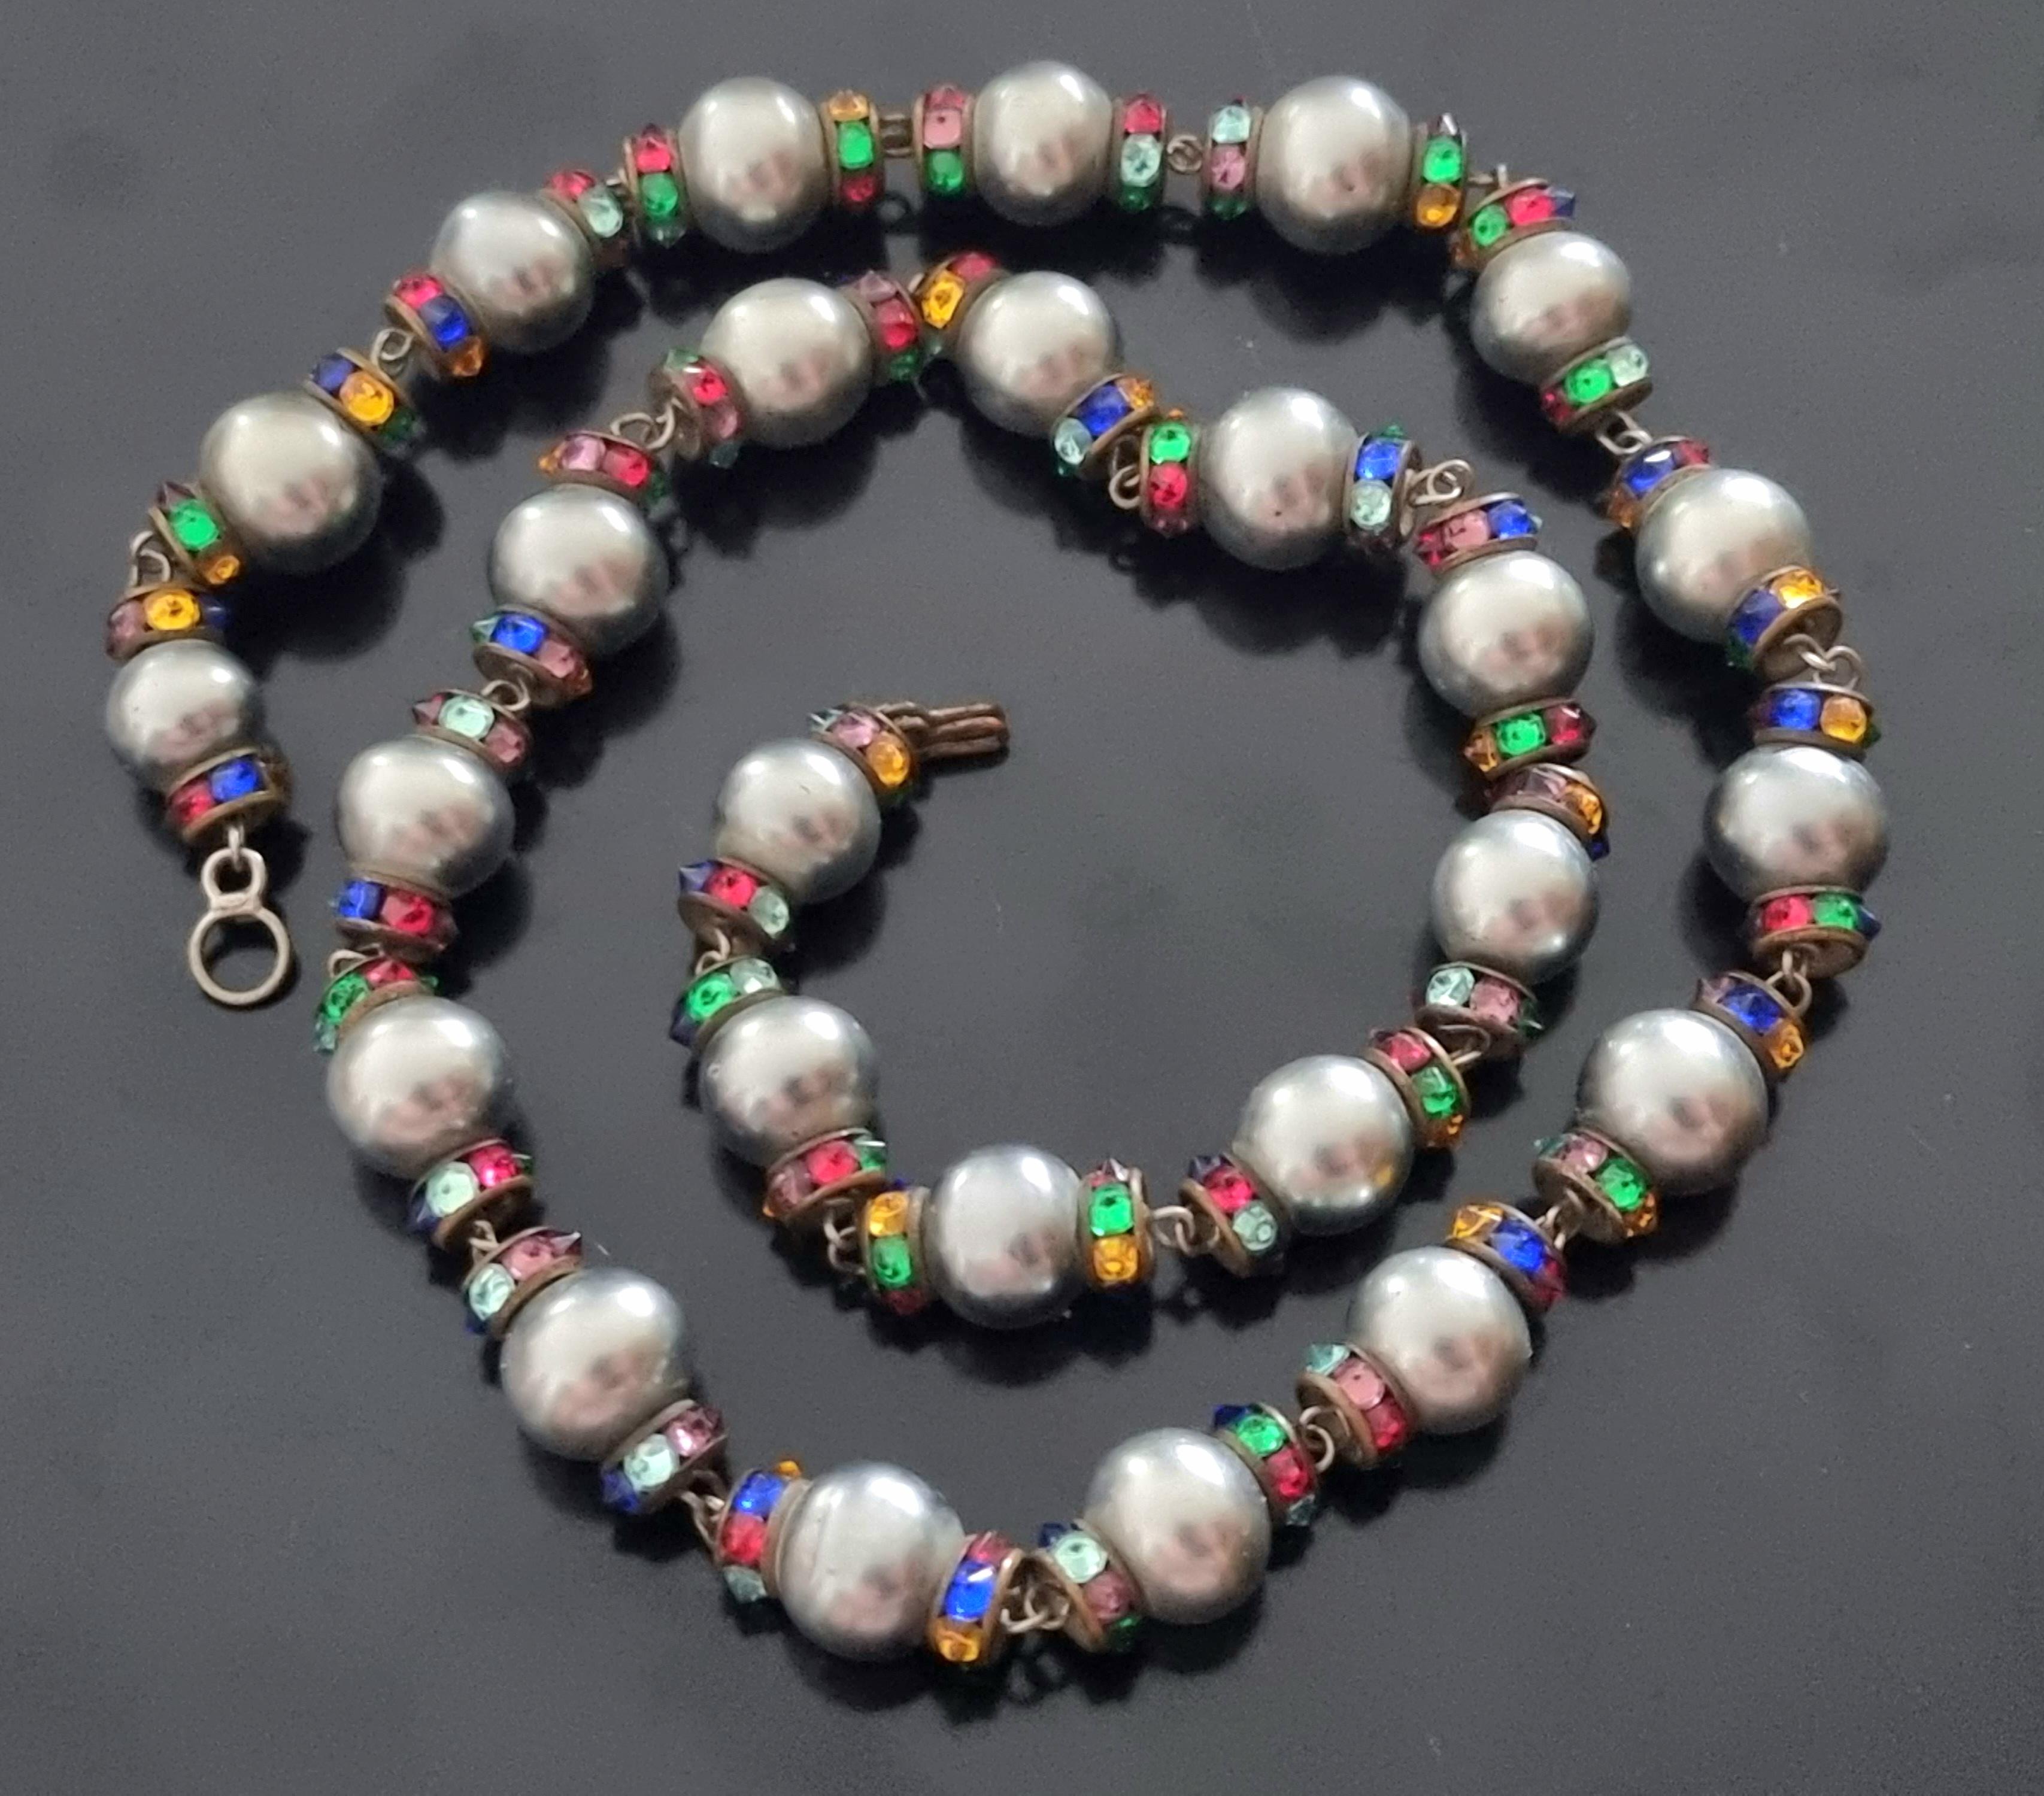 Women's Old CHANEL necklace, Louis Rousselet pearls, rhinestones, vintage from the 40s